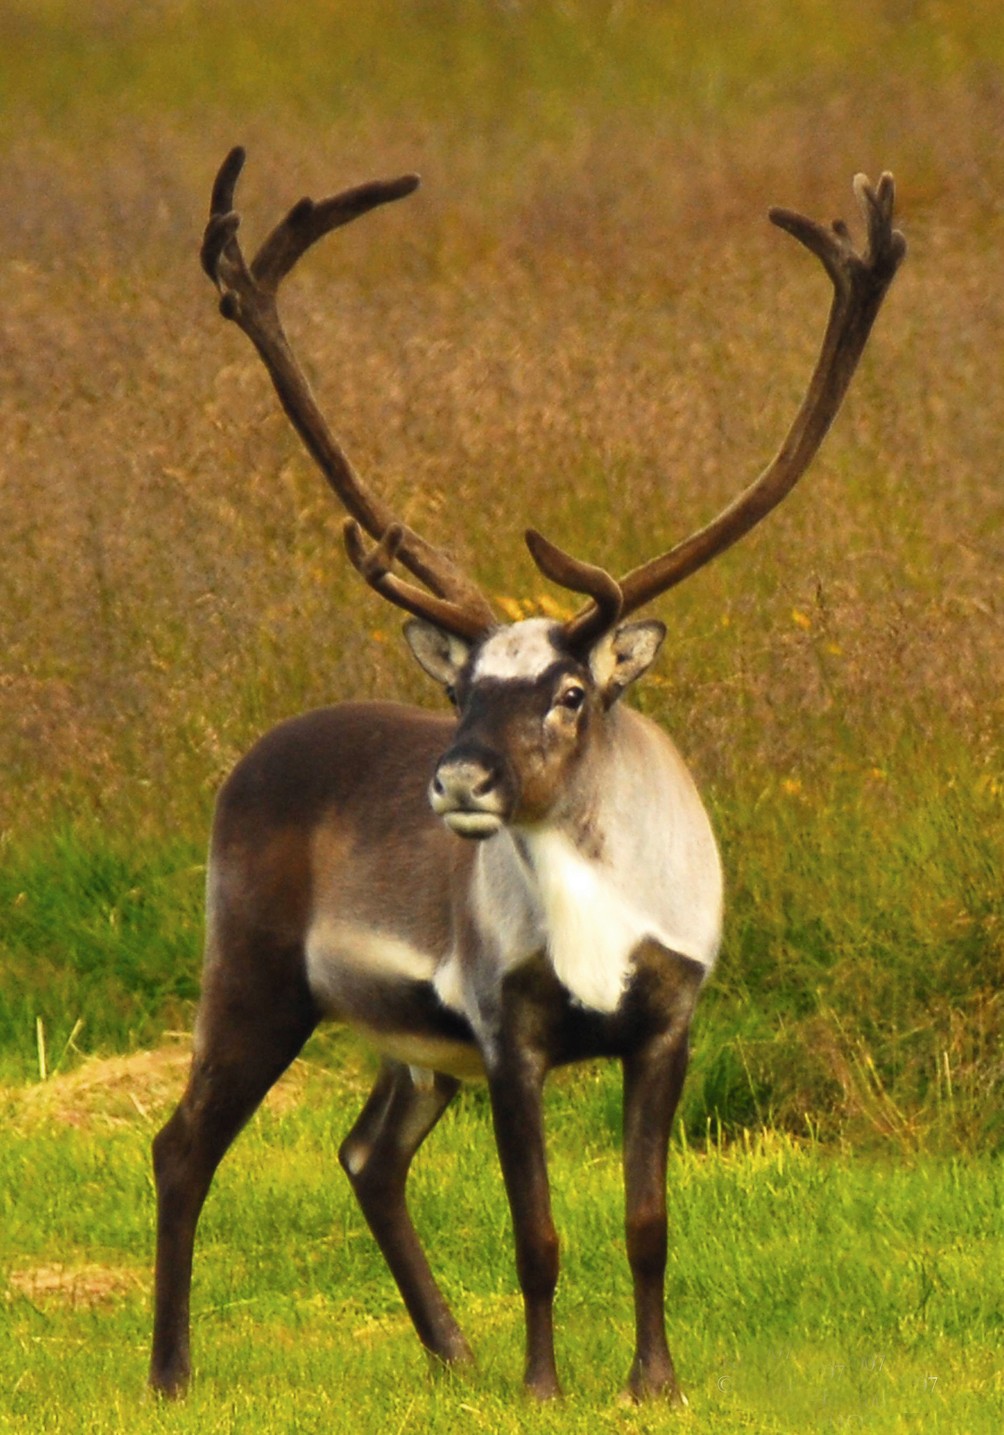 The Home of the Reindeer in Grassy Heaths and Fertile ...